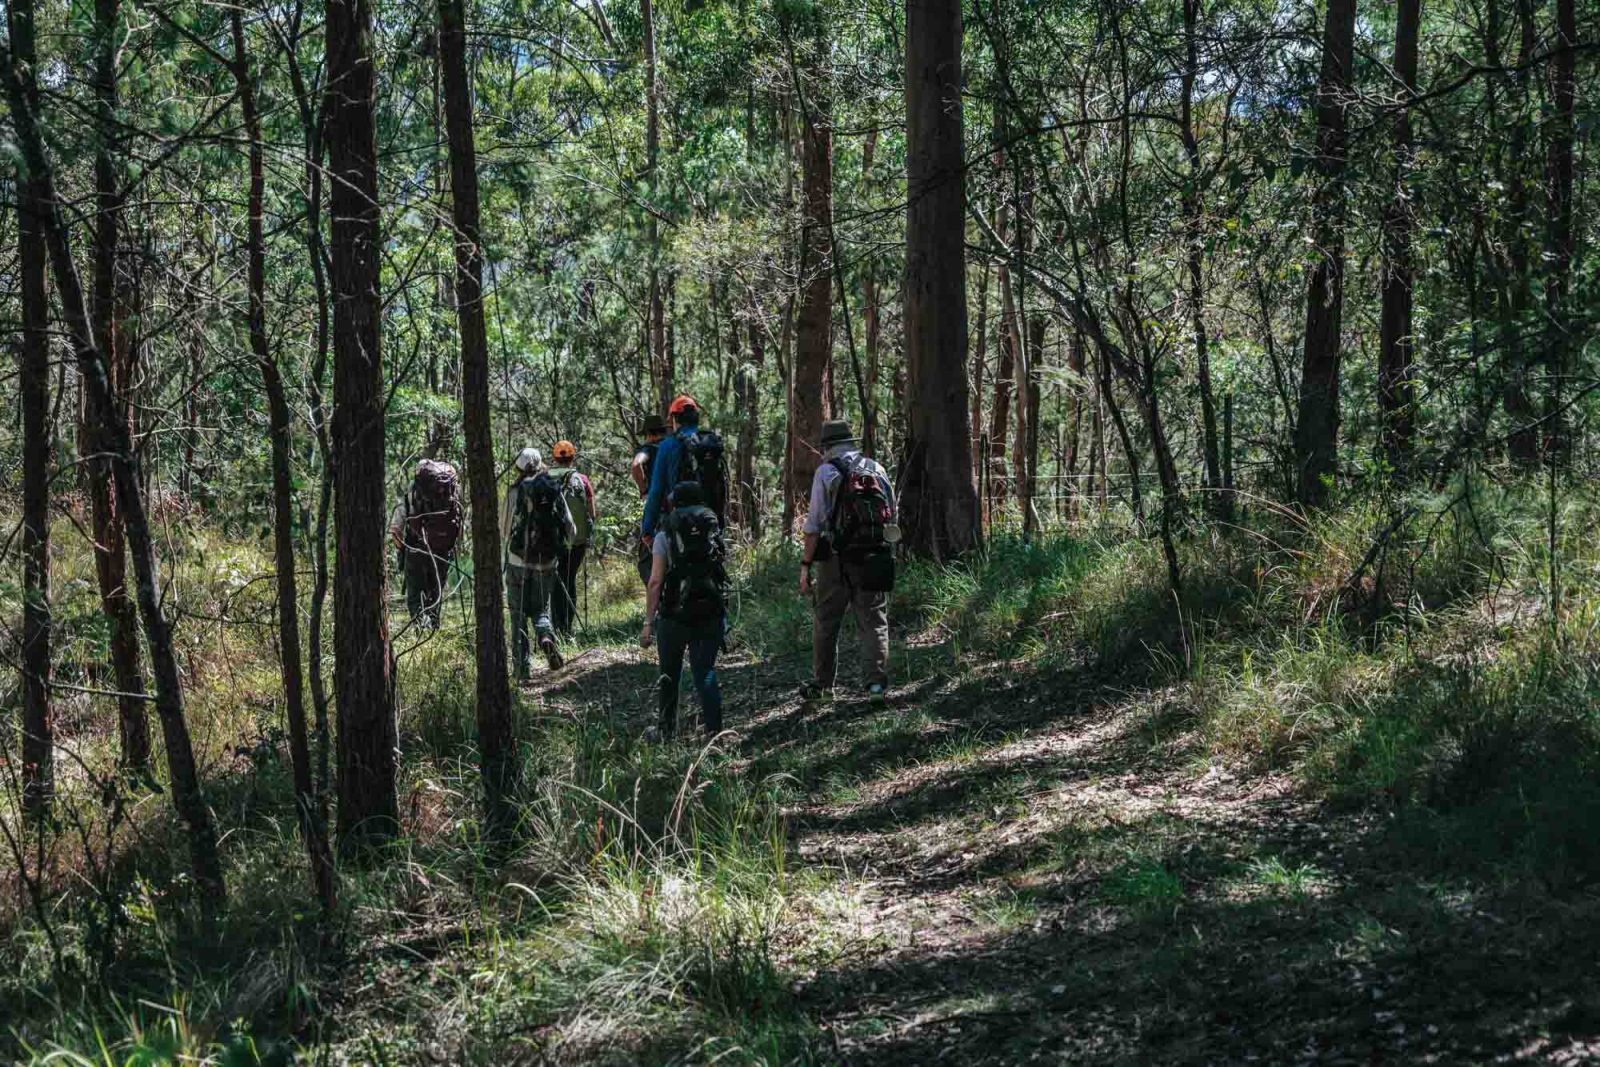 A part of our scenic rim walk